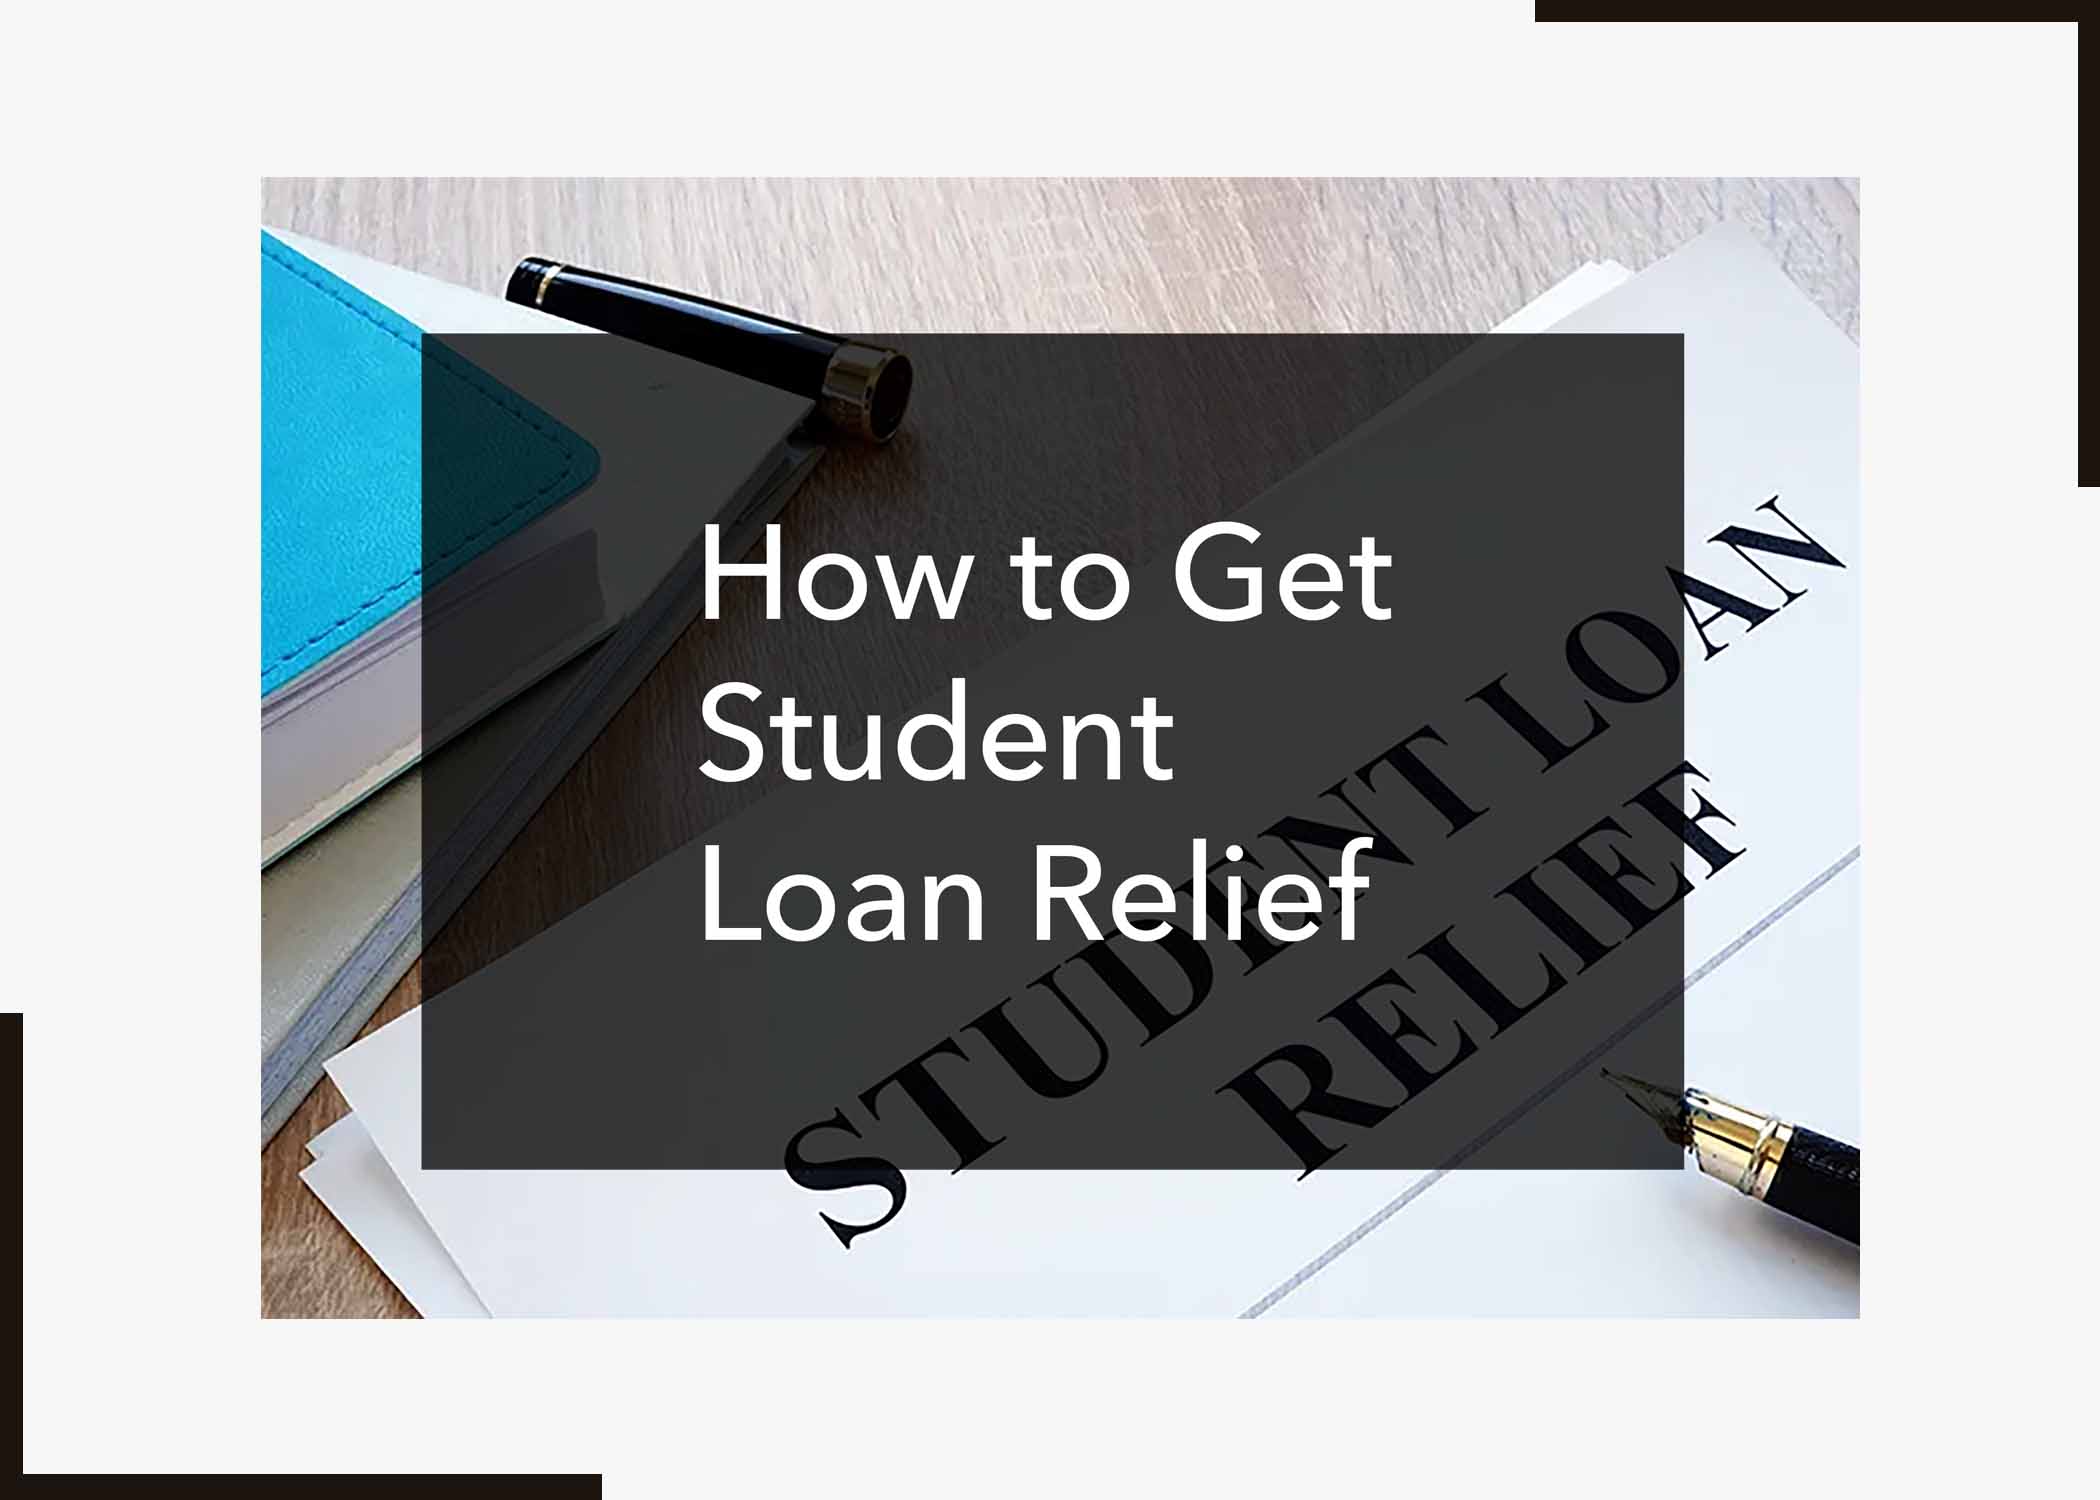 How to Get Student Loan Relief